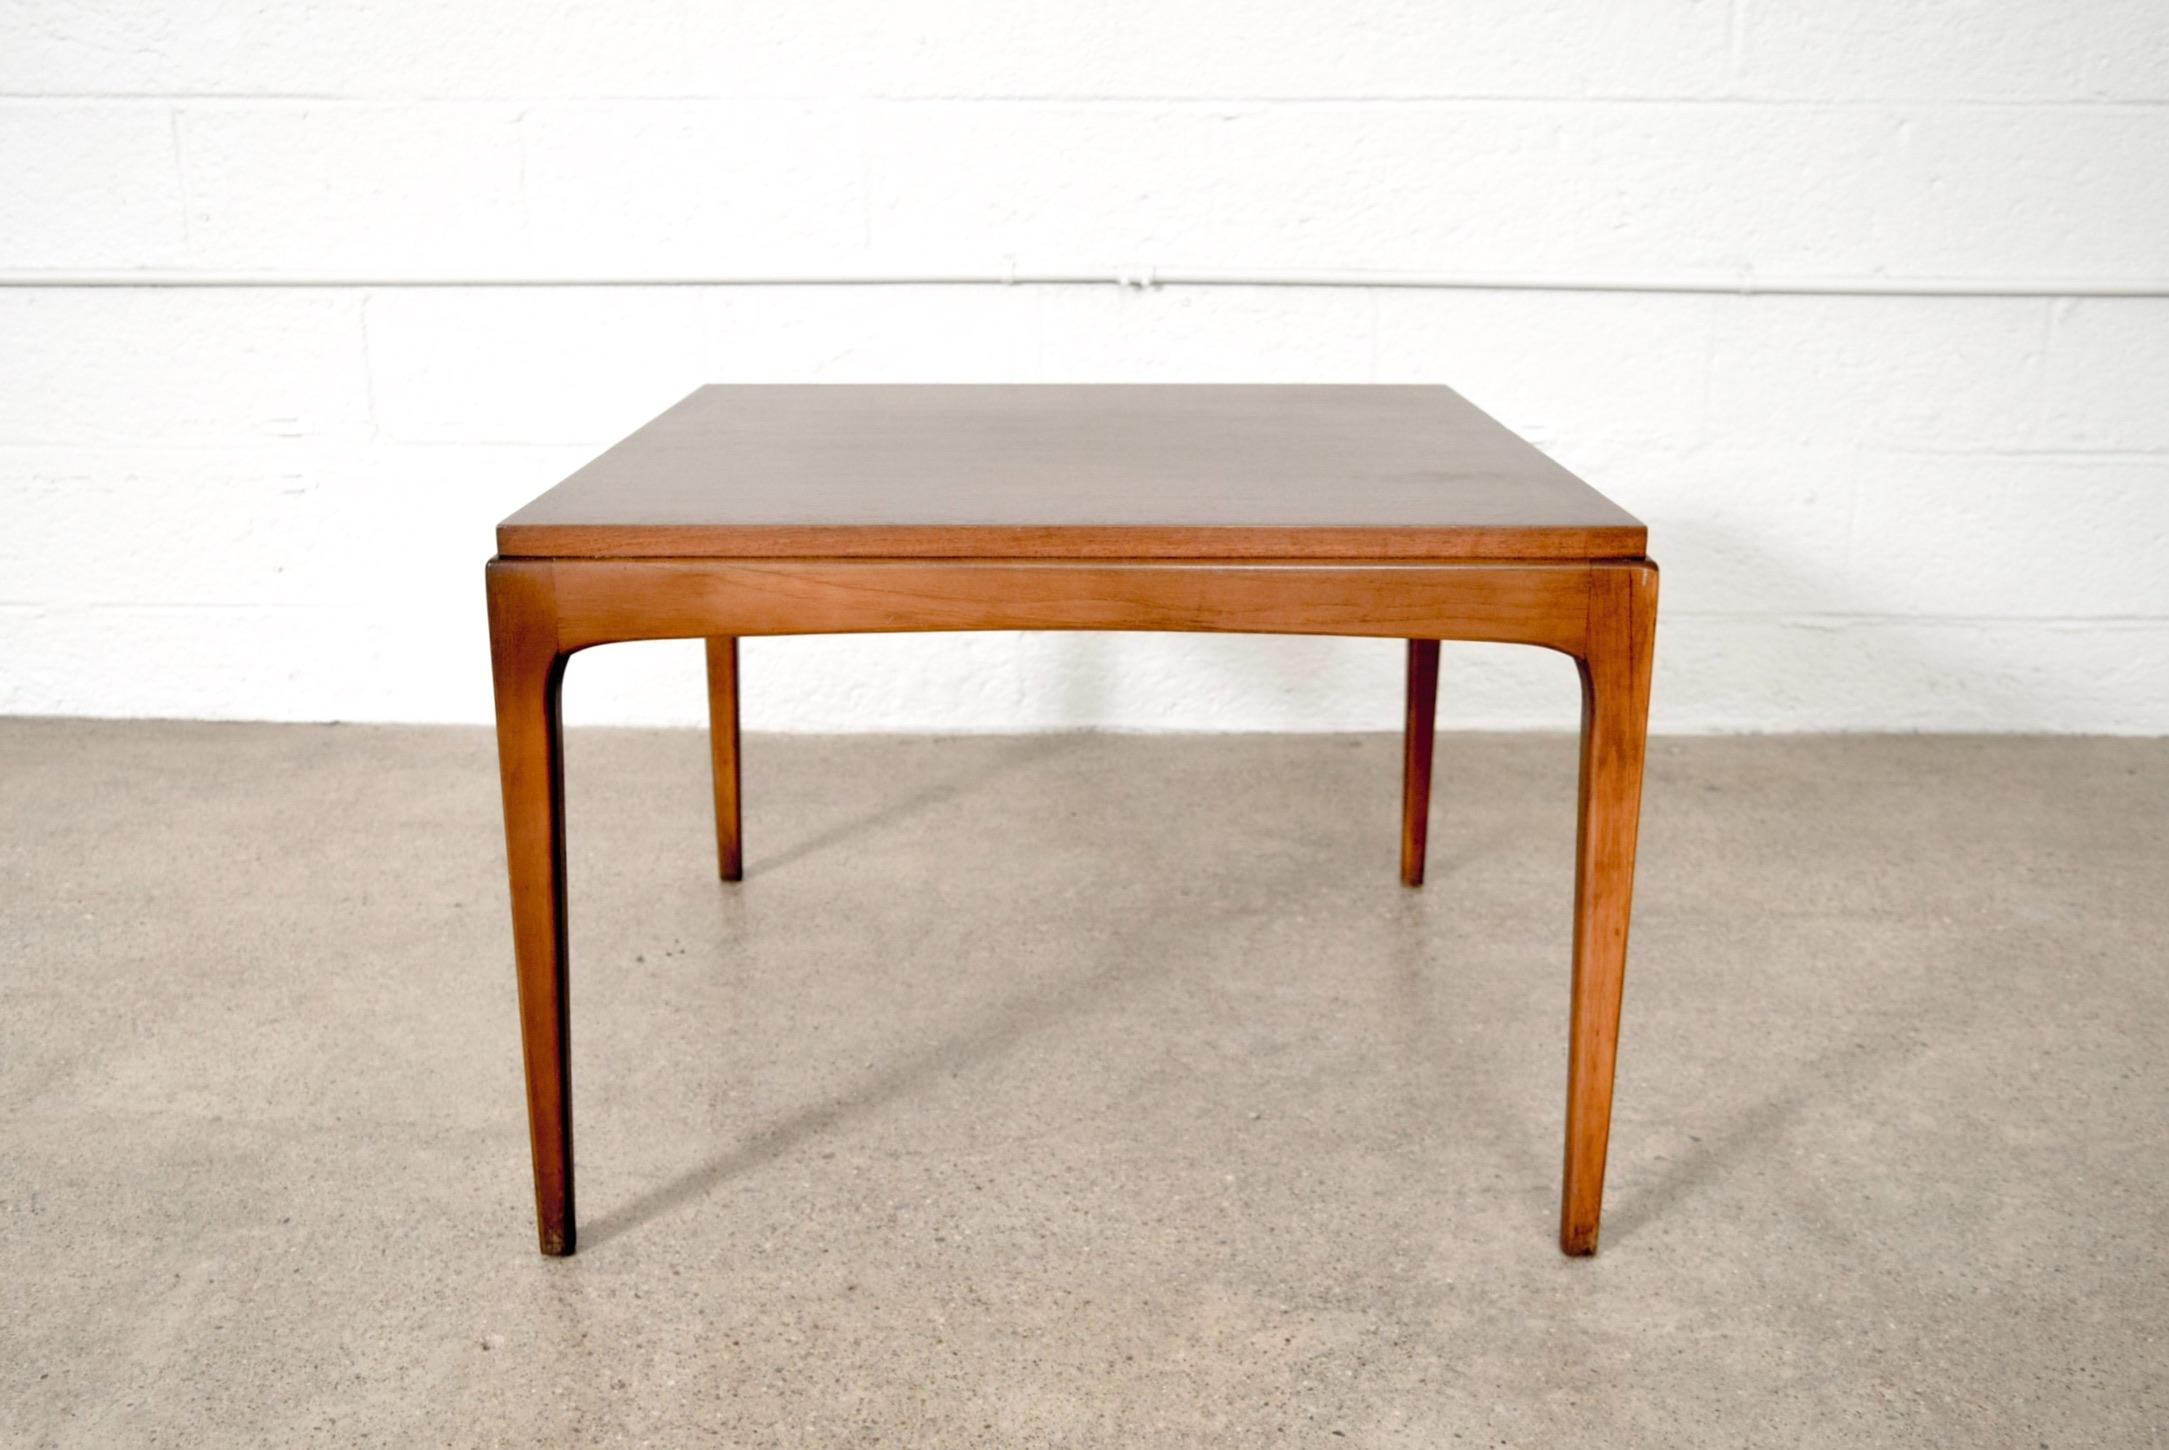 • Vintage Mid-Century Modern lane coffee table from 1962.
• Simple, geometric lines and sleek low profile.
• Well constructed from walnut with beautiful inlaid tabletop edge and squared tapered legs.
 
Marked on underside:
Lane 
Altavista,